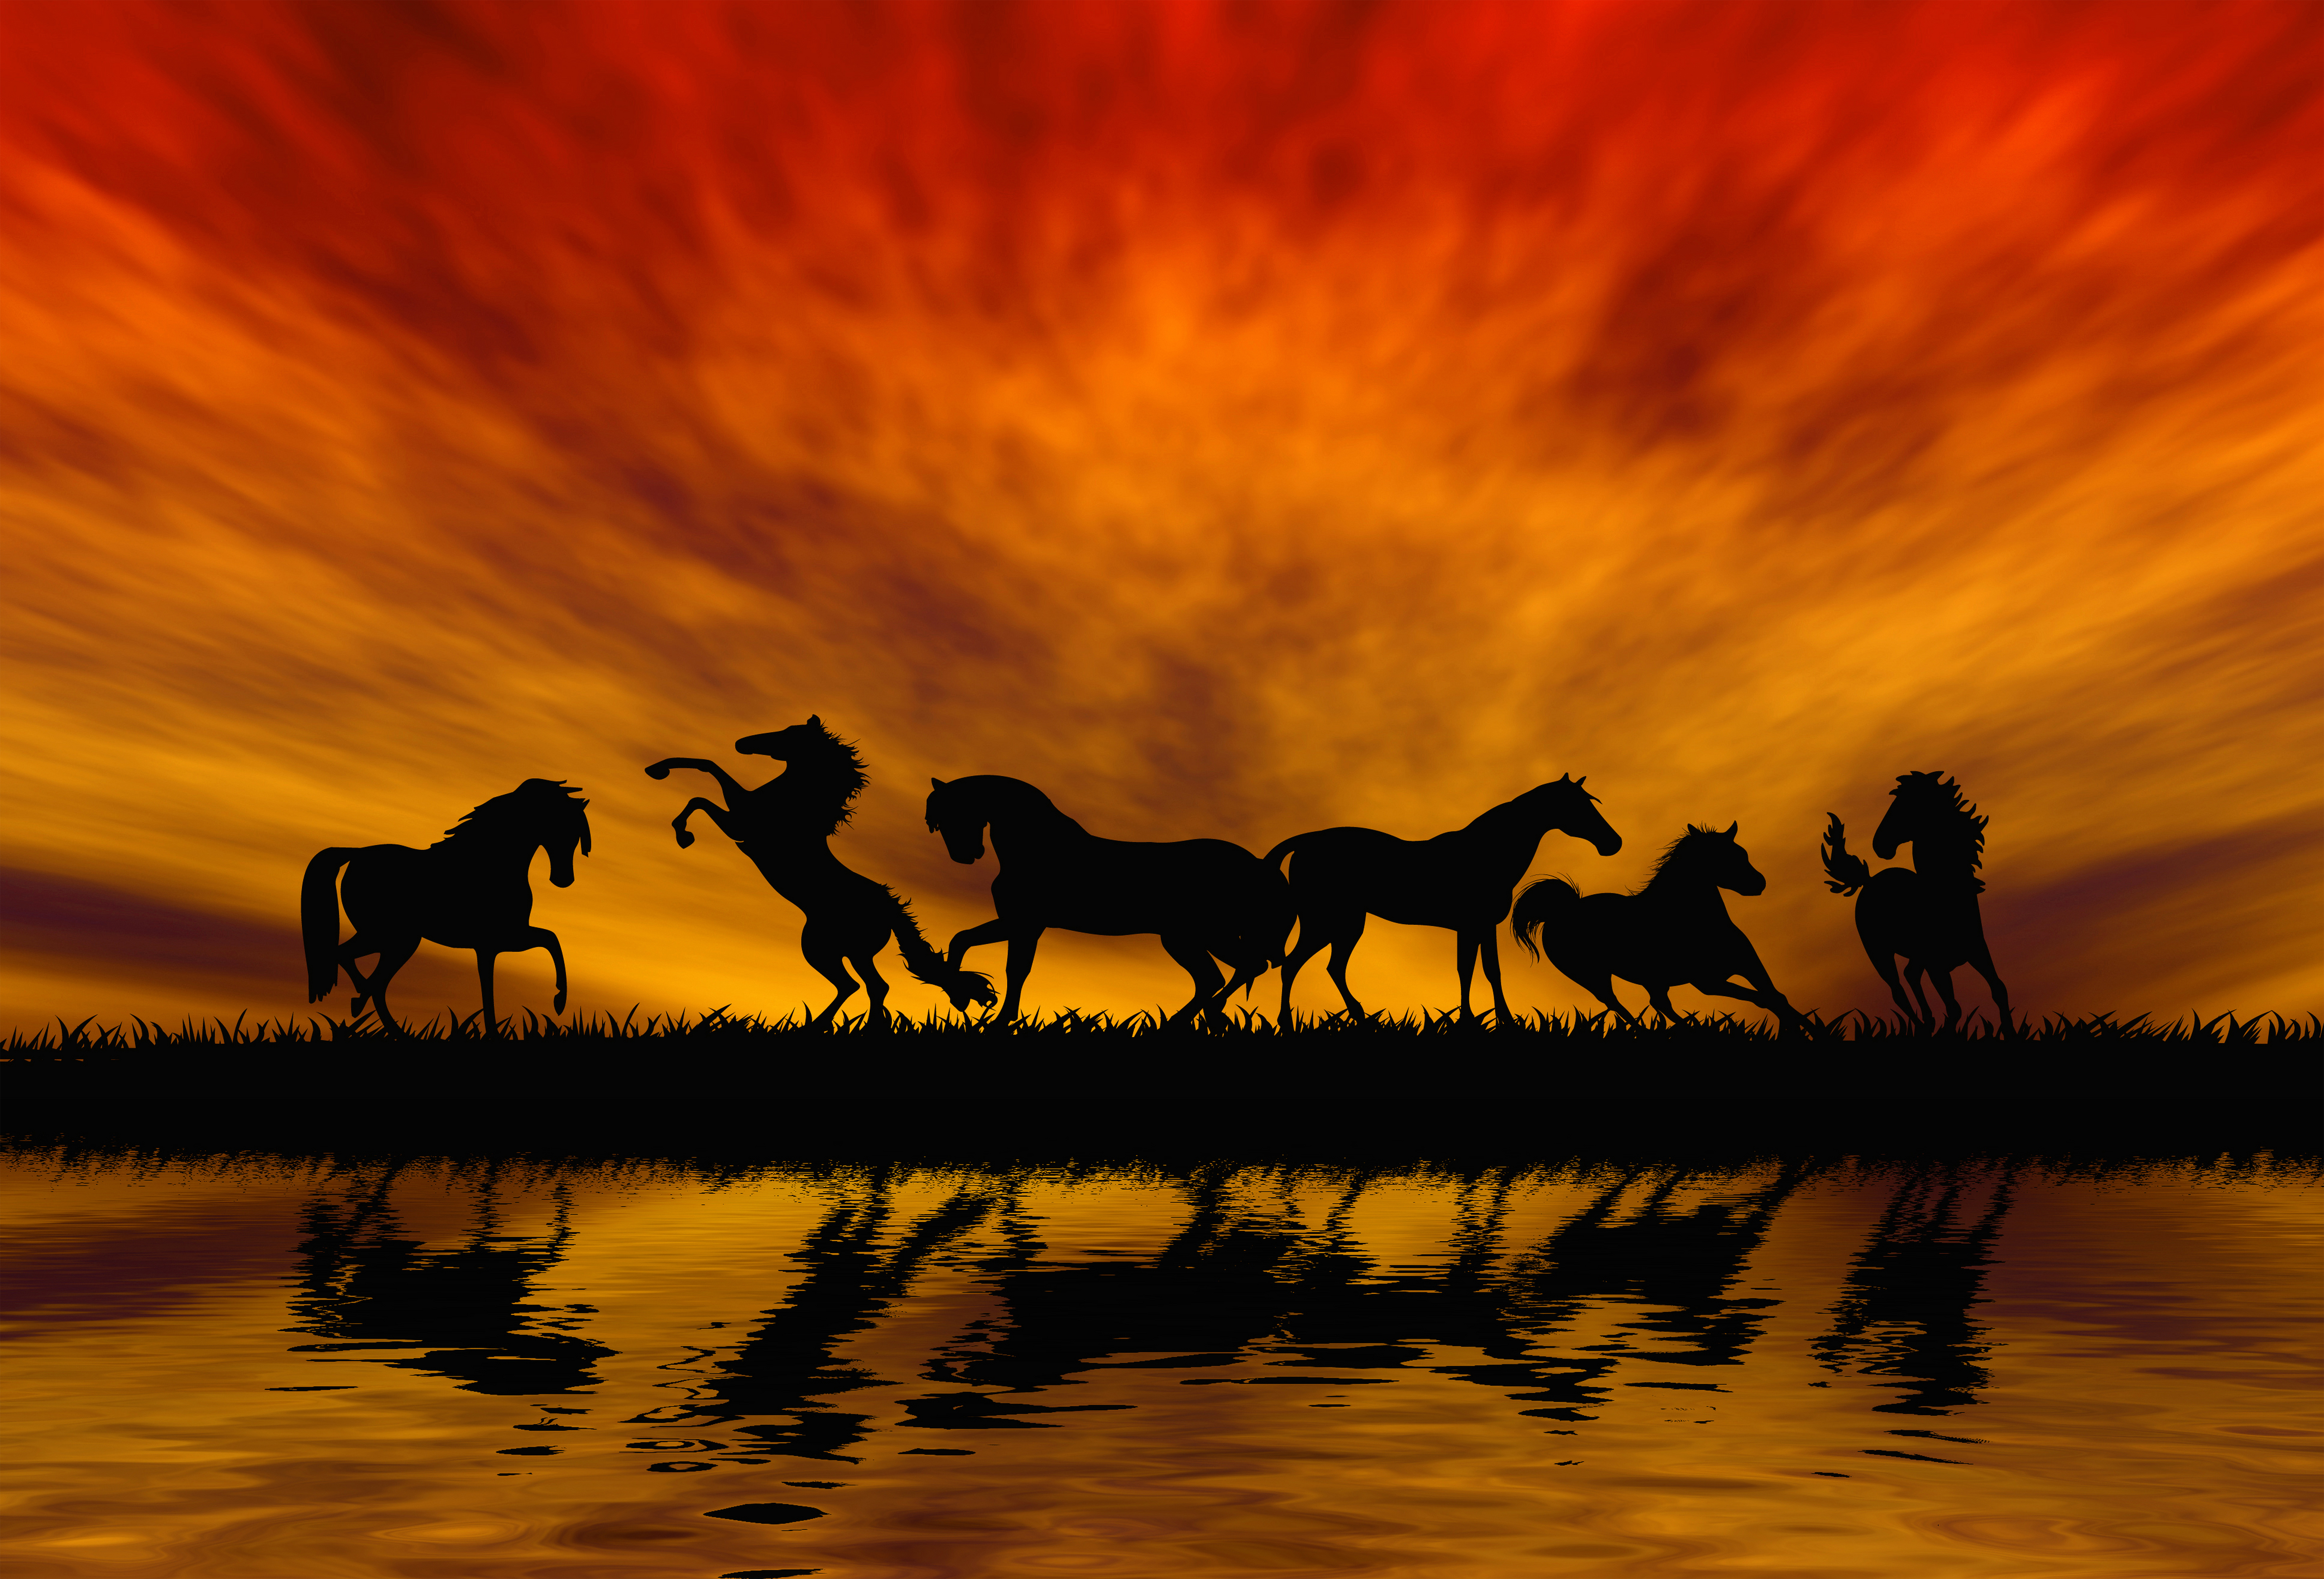 Horses Background Gallery Yopriceville High Quality Image